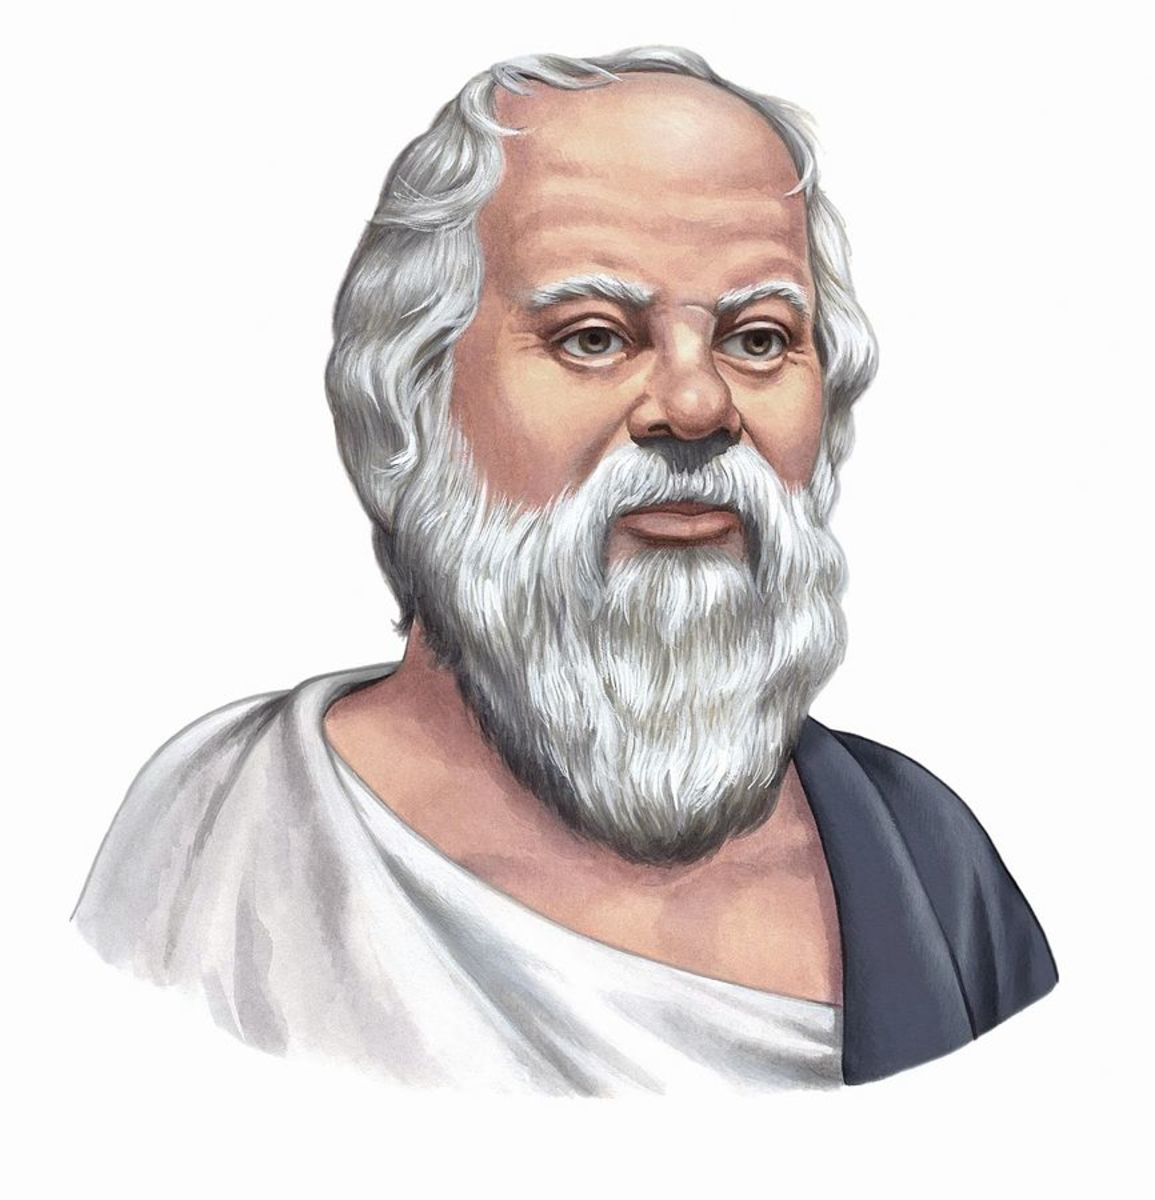 The Life and Times of the Ancient Greek Philosopher Socrates